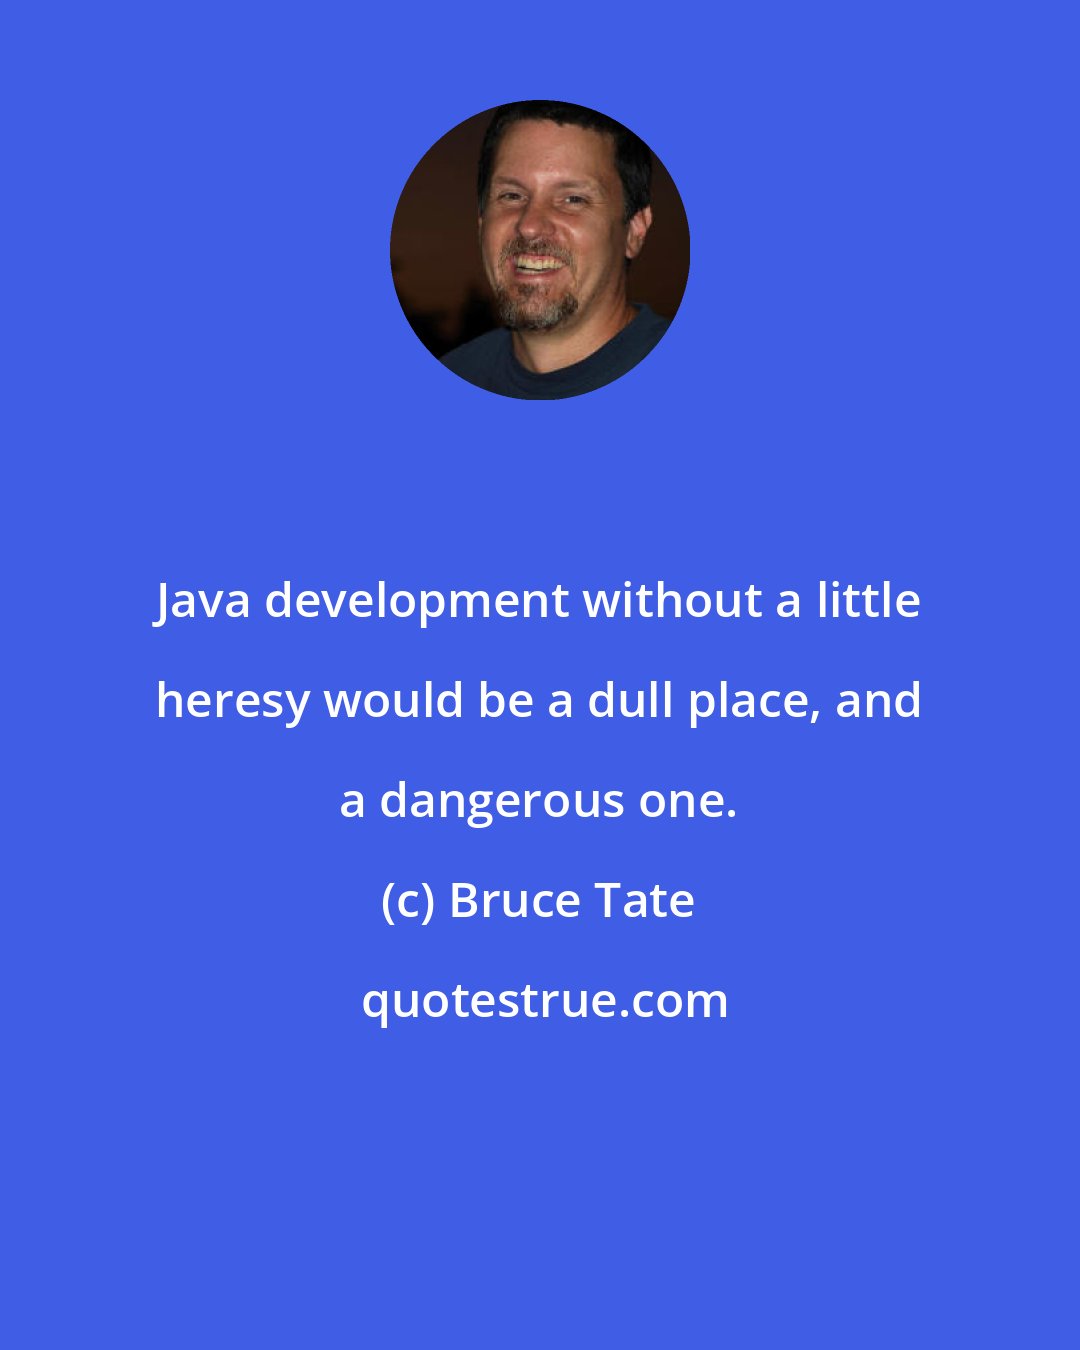 Bruce Tate: Java development without a little heresy would be a dull place, and a dangerous one.